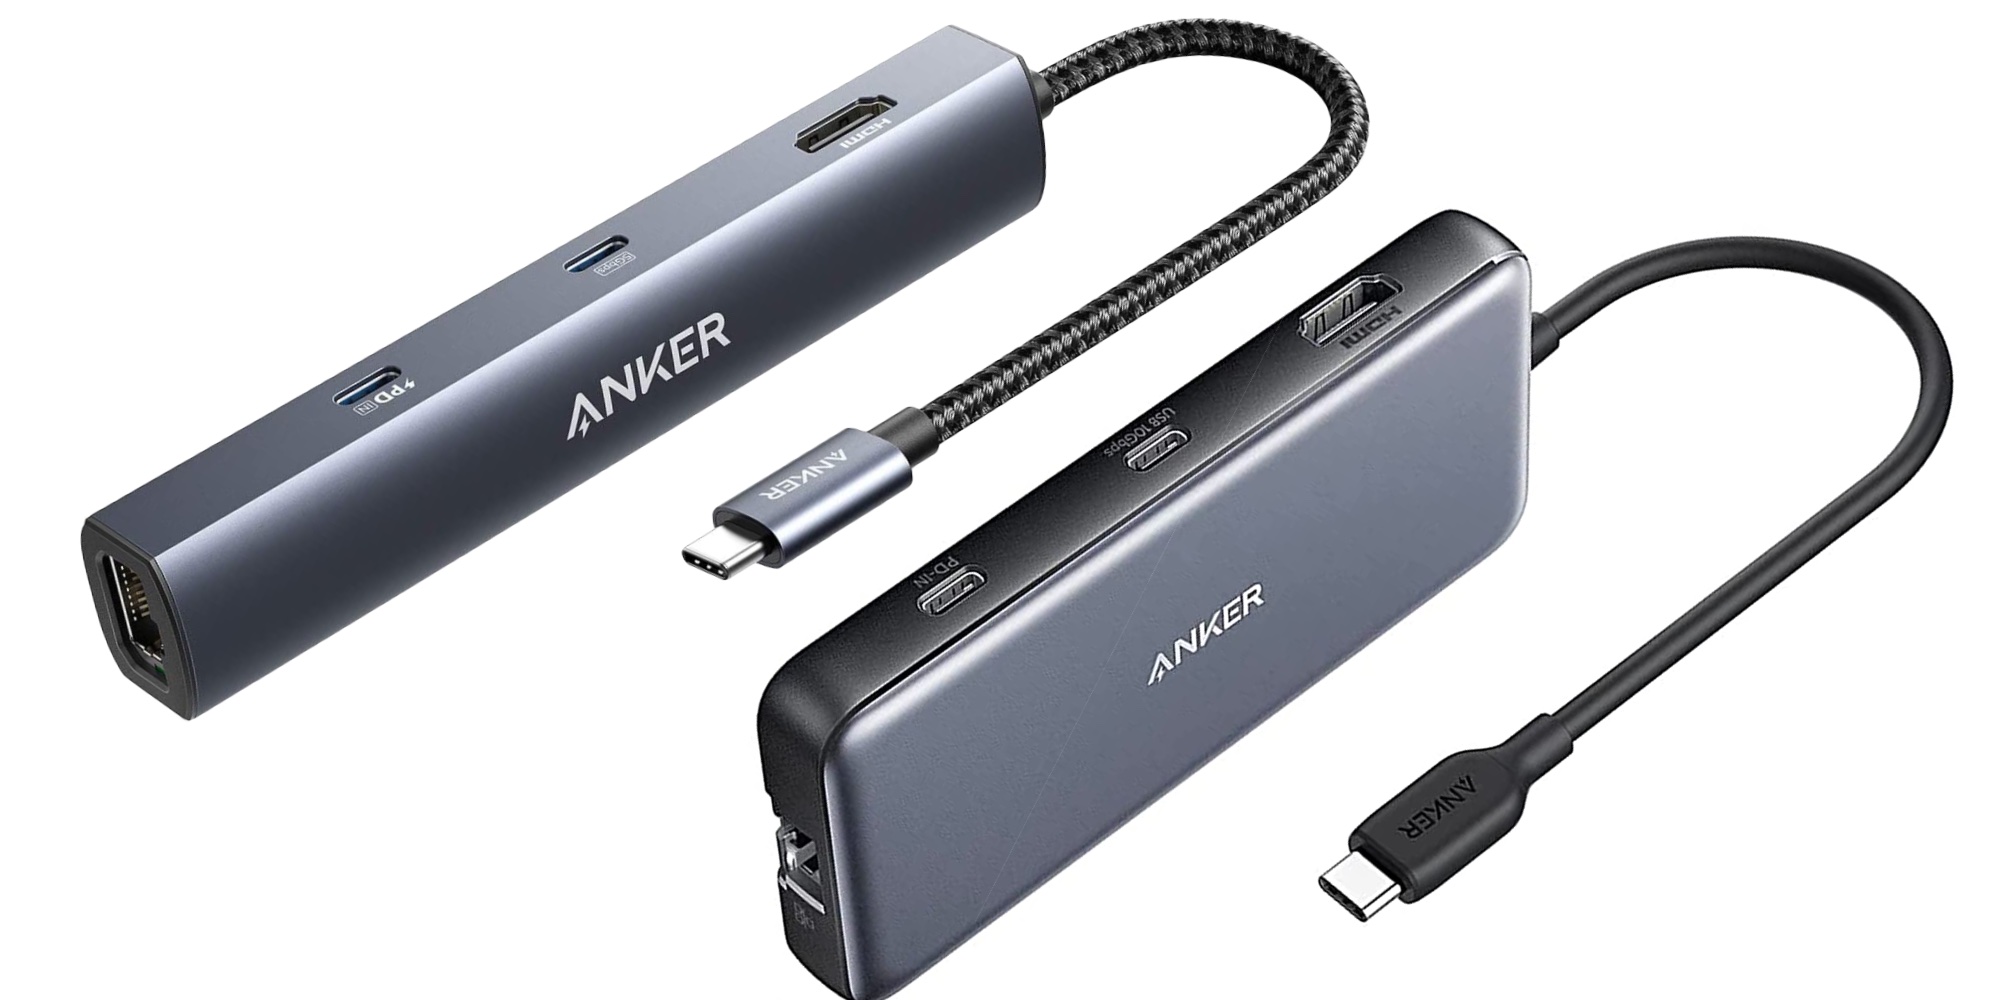 Power everything with this dual-USB-C Anker wall charger for $27